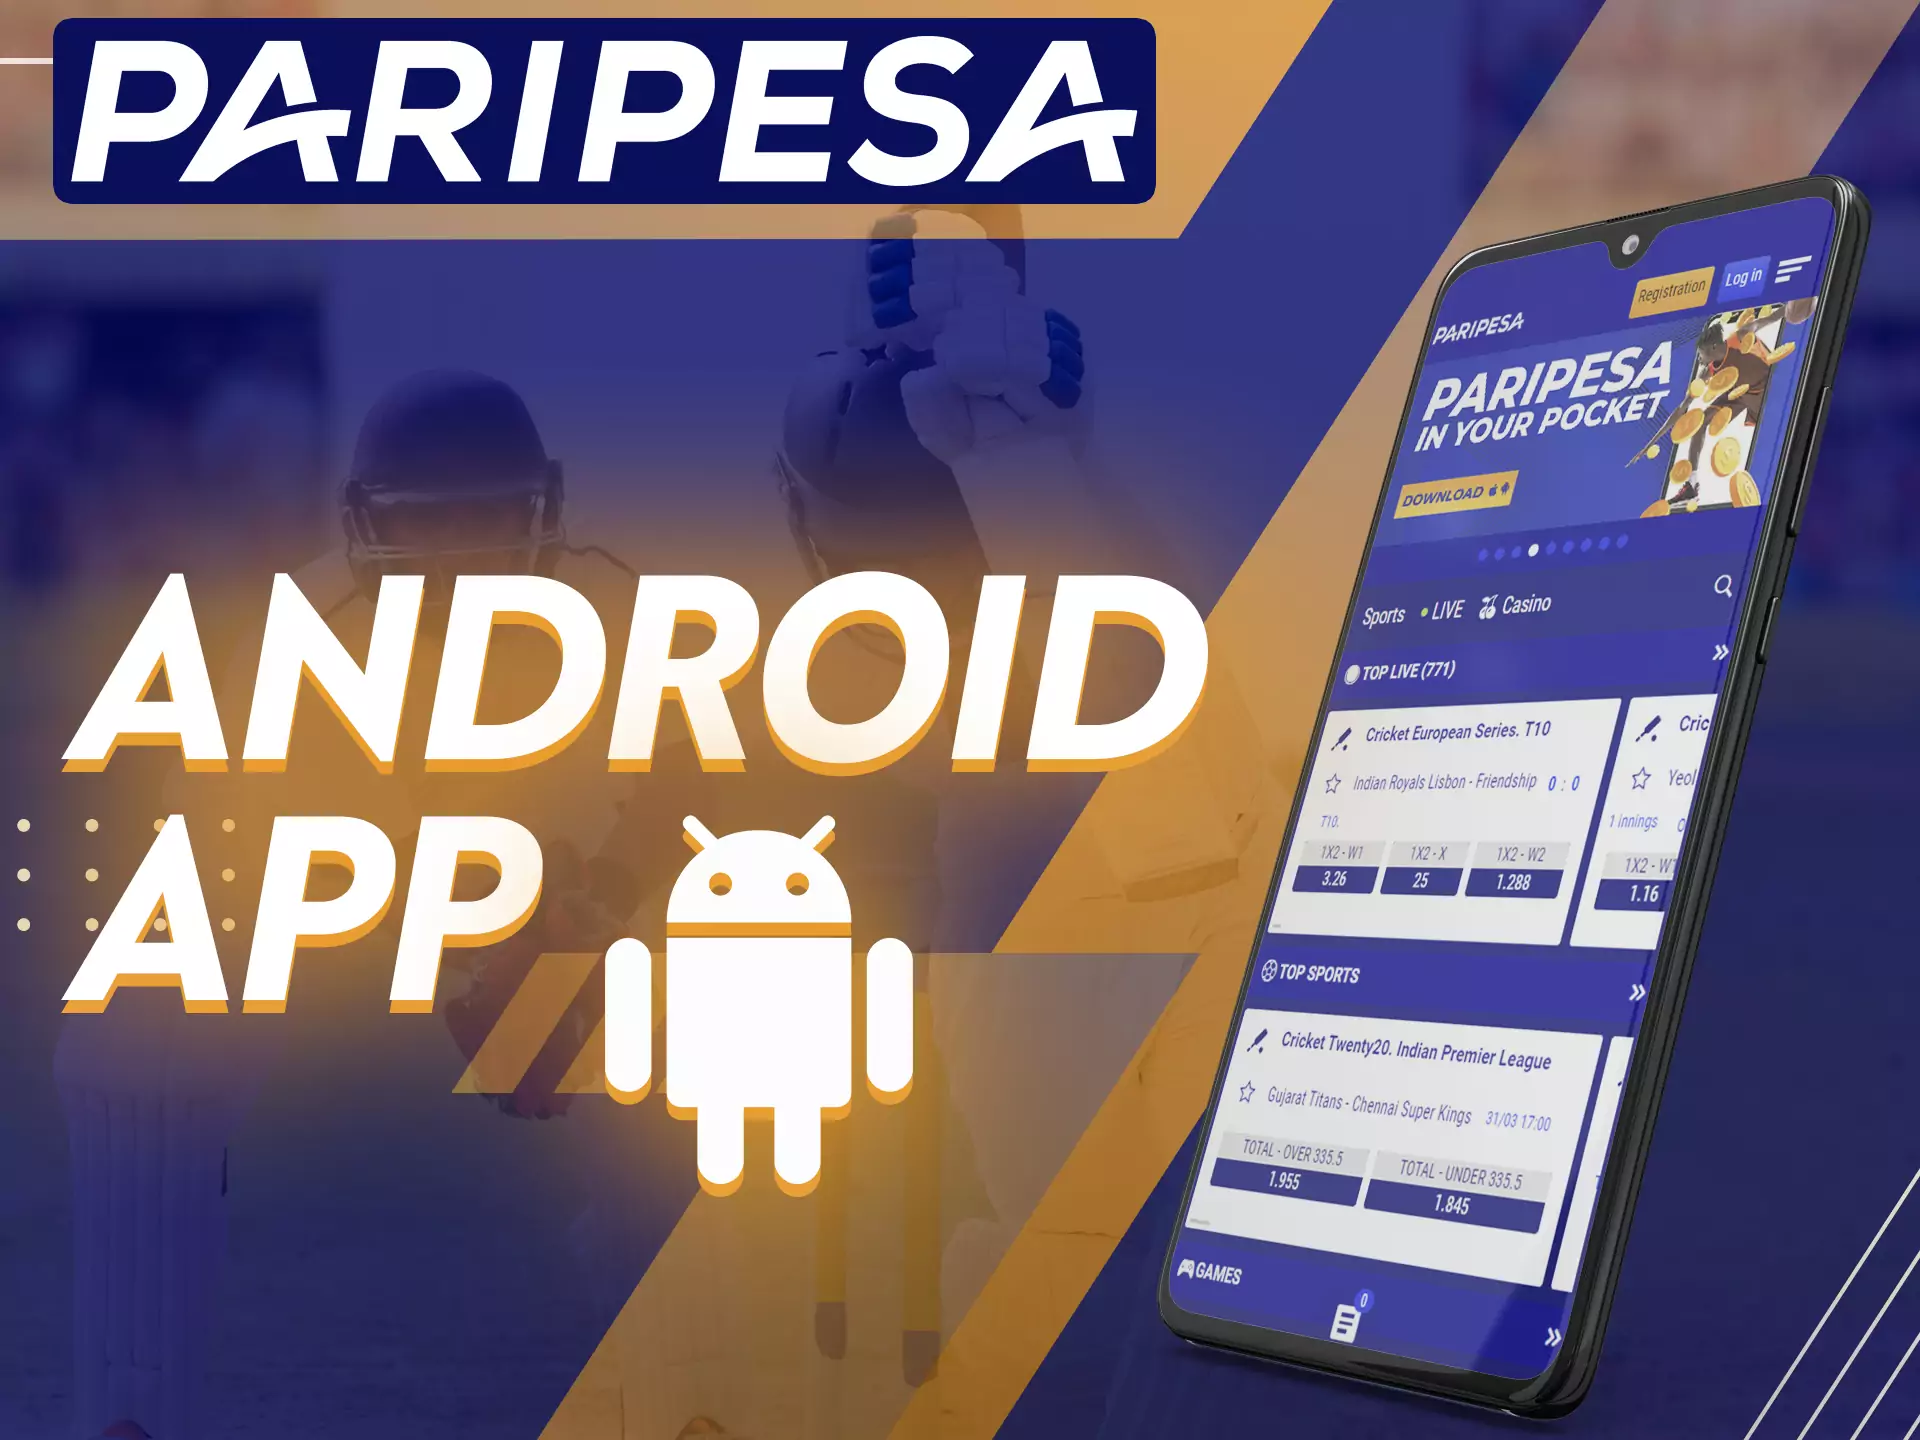 You can easily install the Paripesa app on your Android phone.